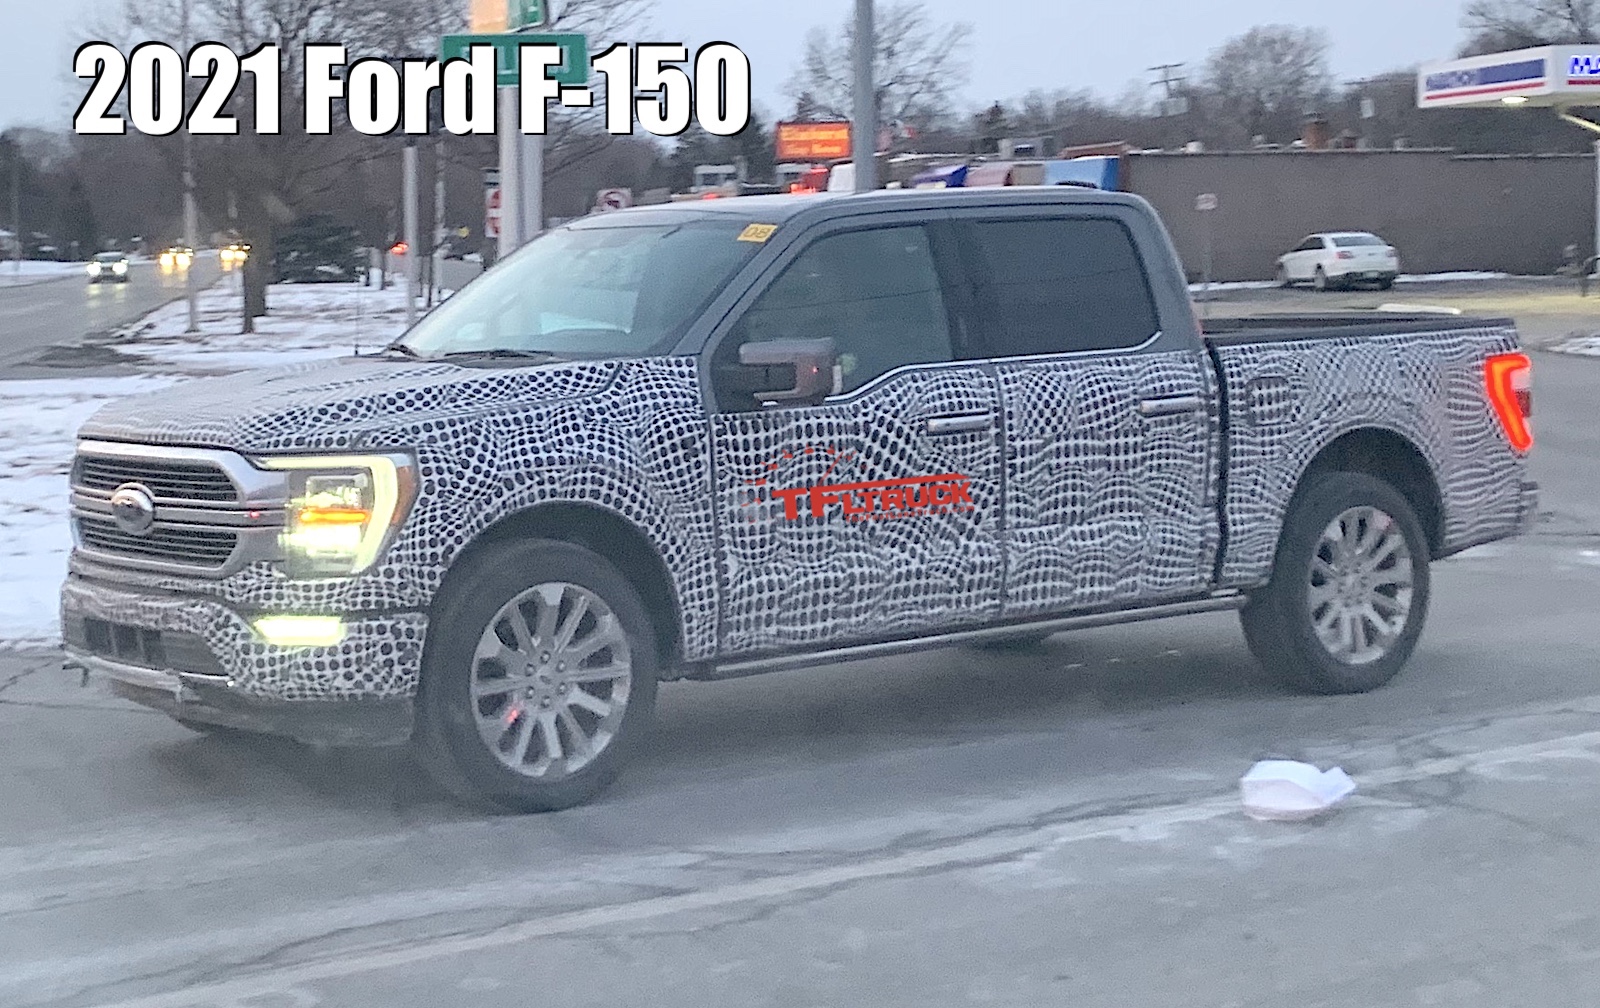 2021 Ford F 150 When Will It Be Officially Revealed The Fast Lane Truck